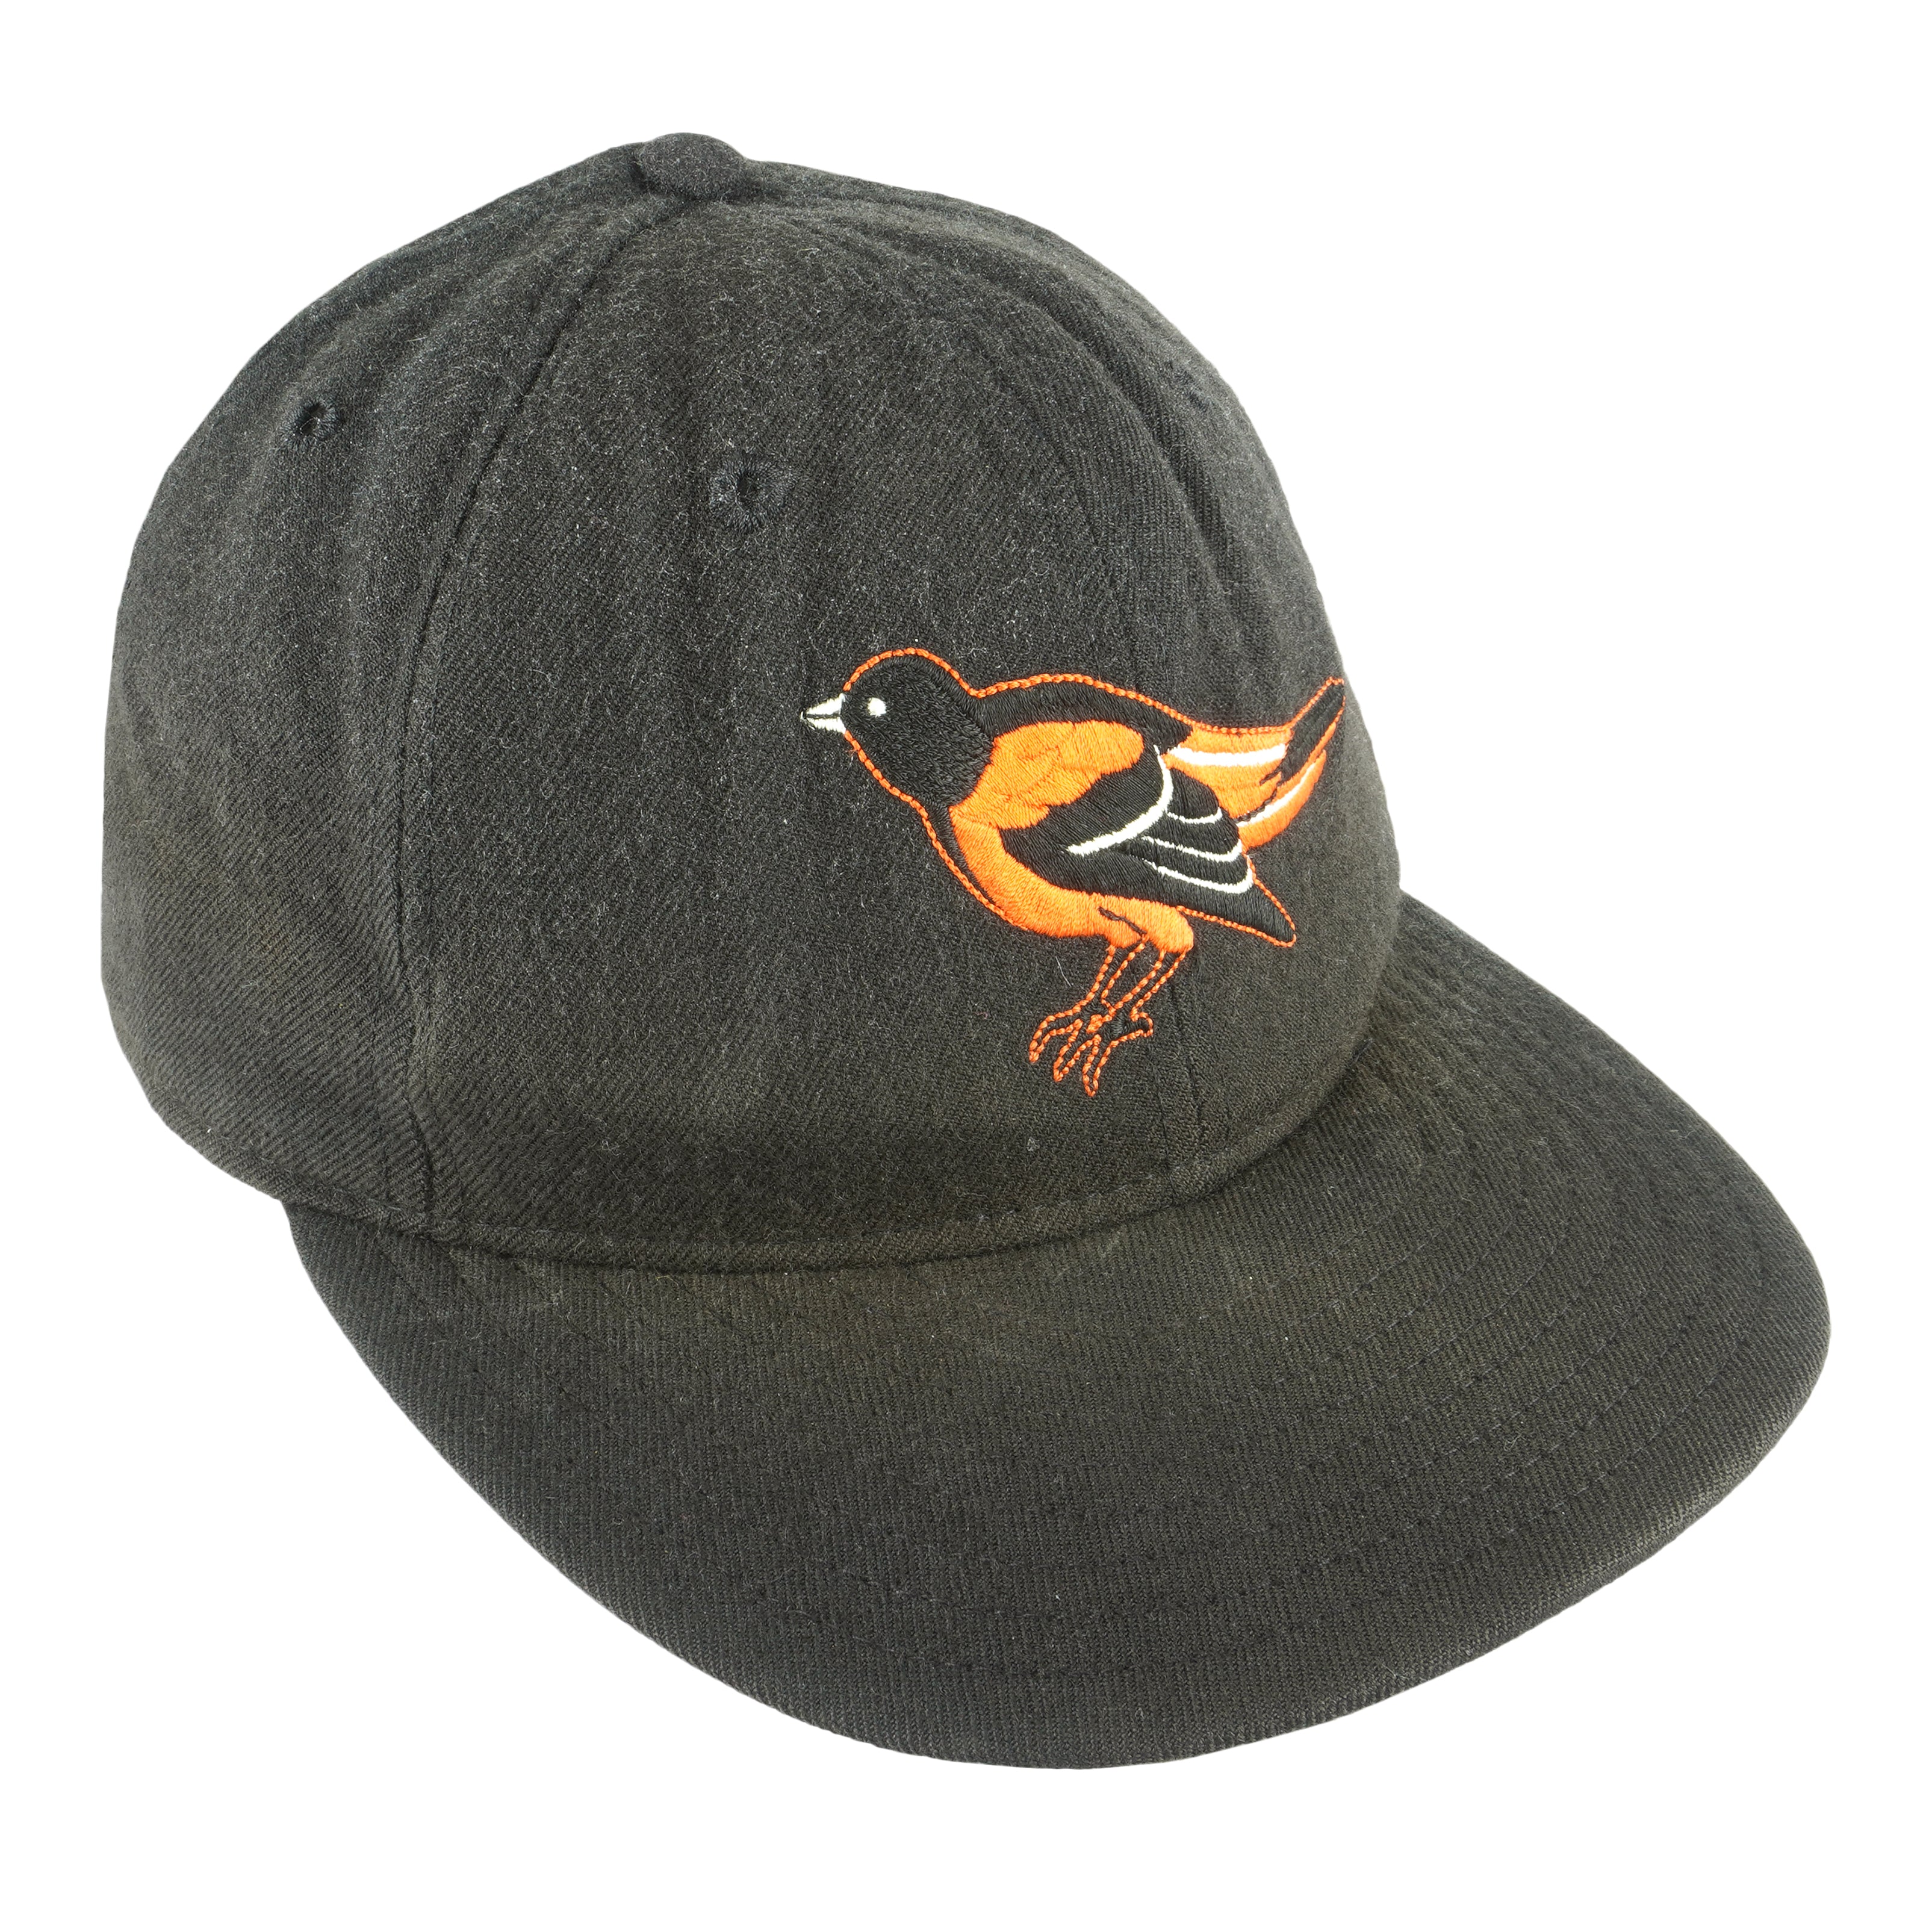 Pro Standard Baltimore Orioles MLB Hat with Leather Visor